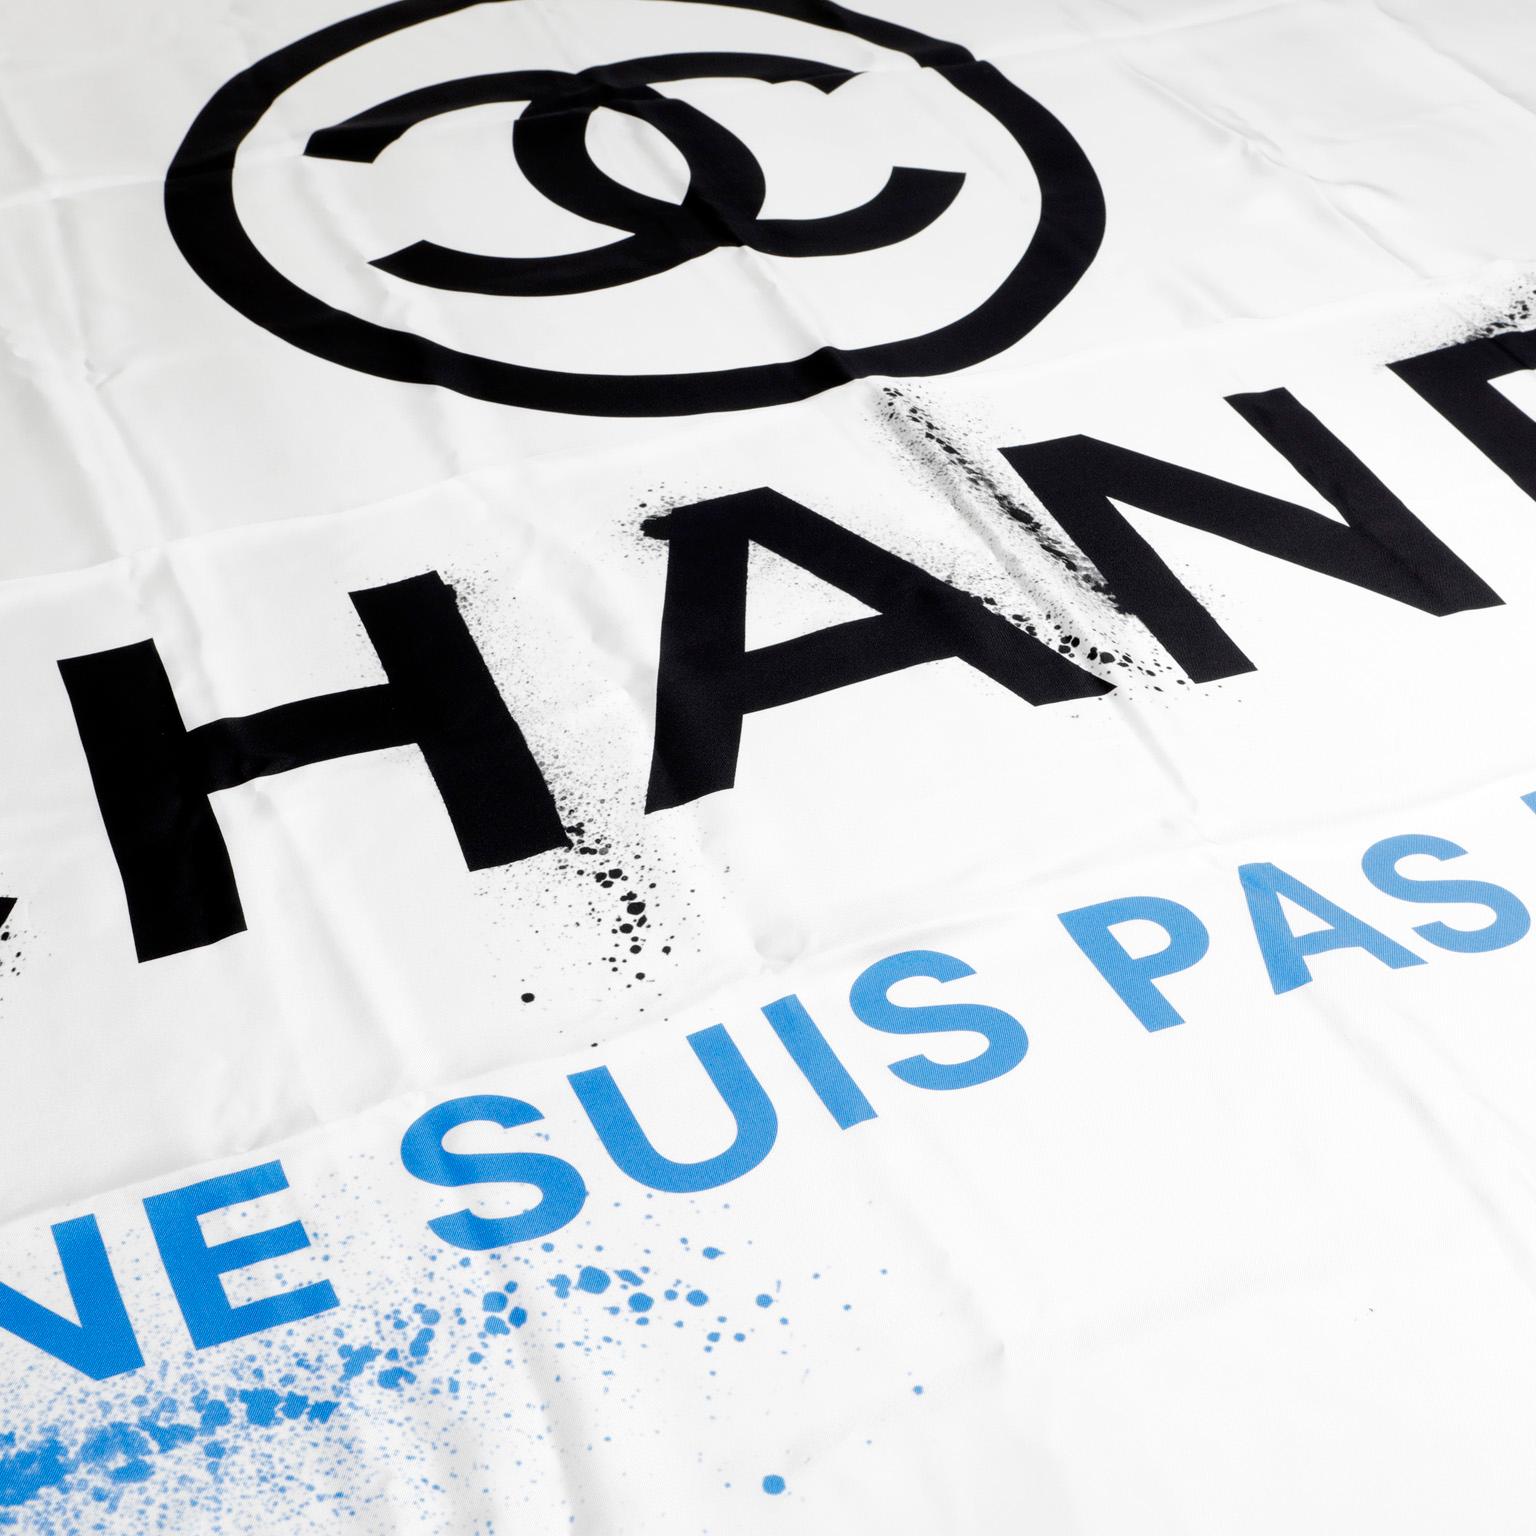 This authentic Chanel White Silk Je Ne Suis Pas En Solde Scarf is in pristine condition.  White silk blend scarf with black Chanel lettering and logo with spraypainted effect.  Je Ne Suis Pas En Solde (“I am not on sale”) in blue. 100% silk. Made in